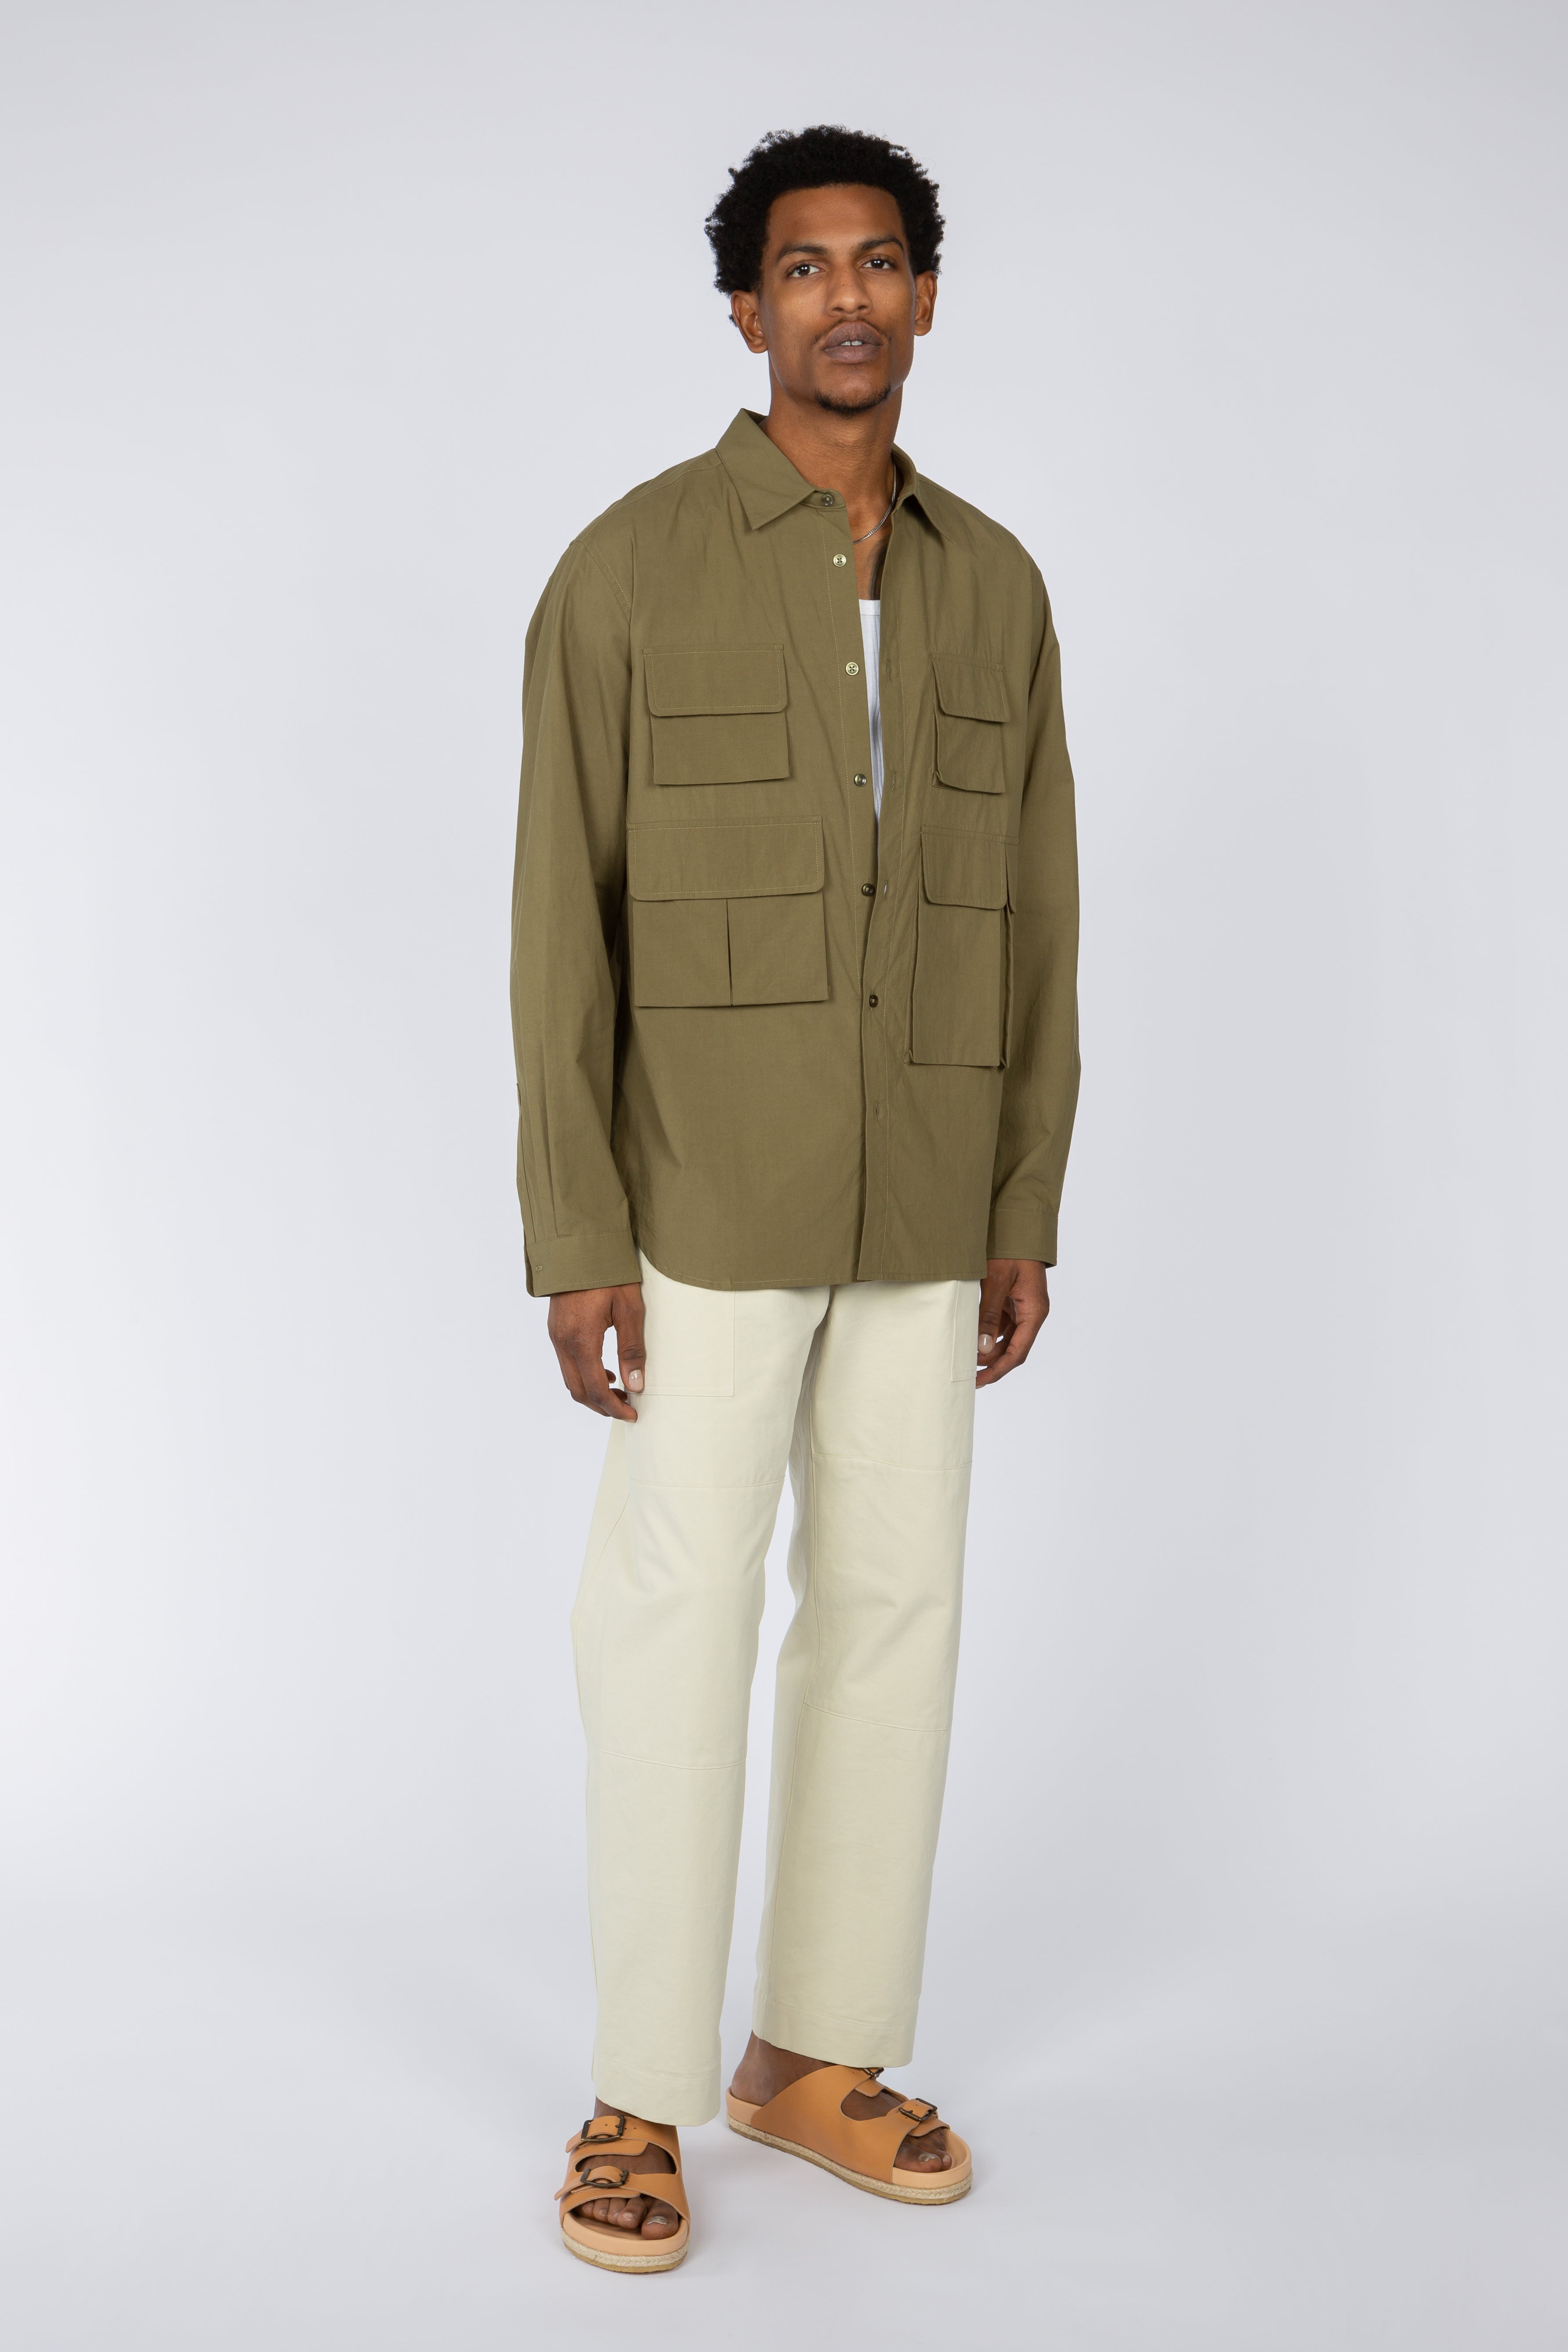 Multi-Pocket Utility Shirt - Olive Ripstop – SHADES OF GREY BY